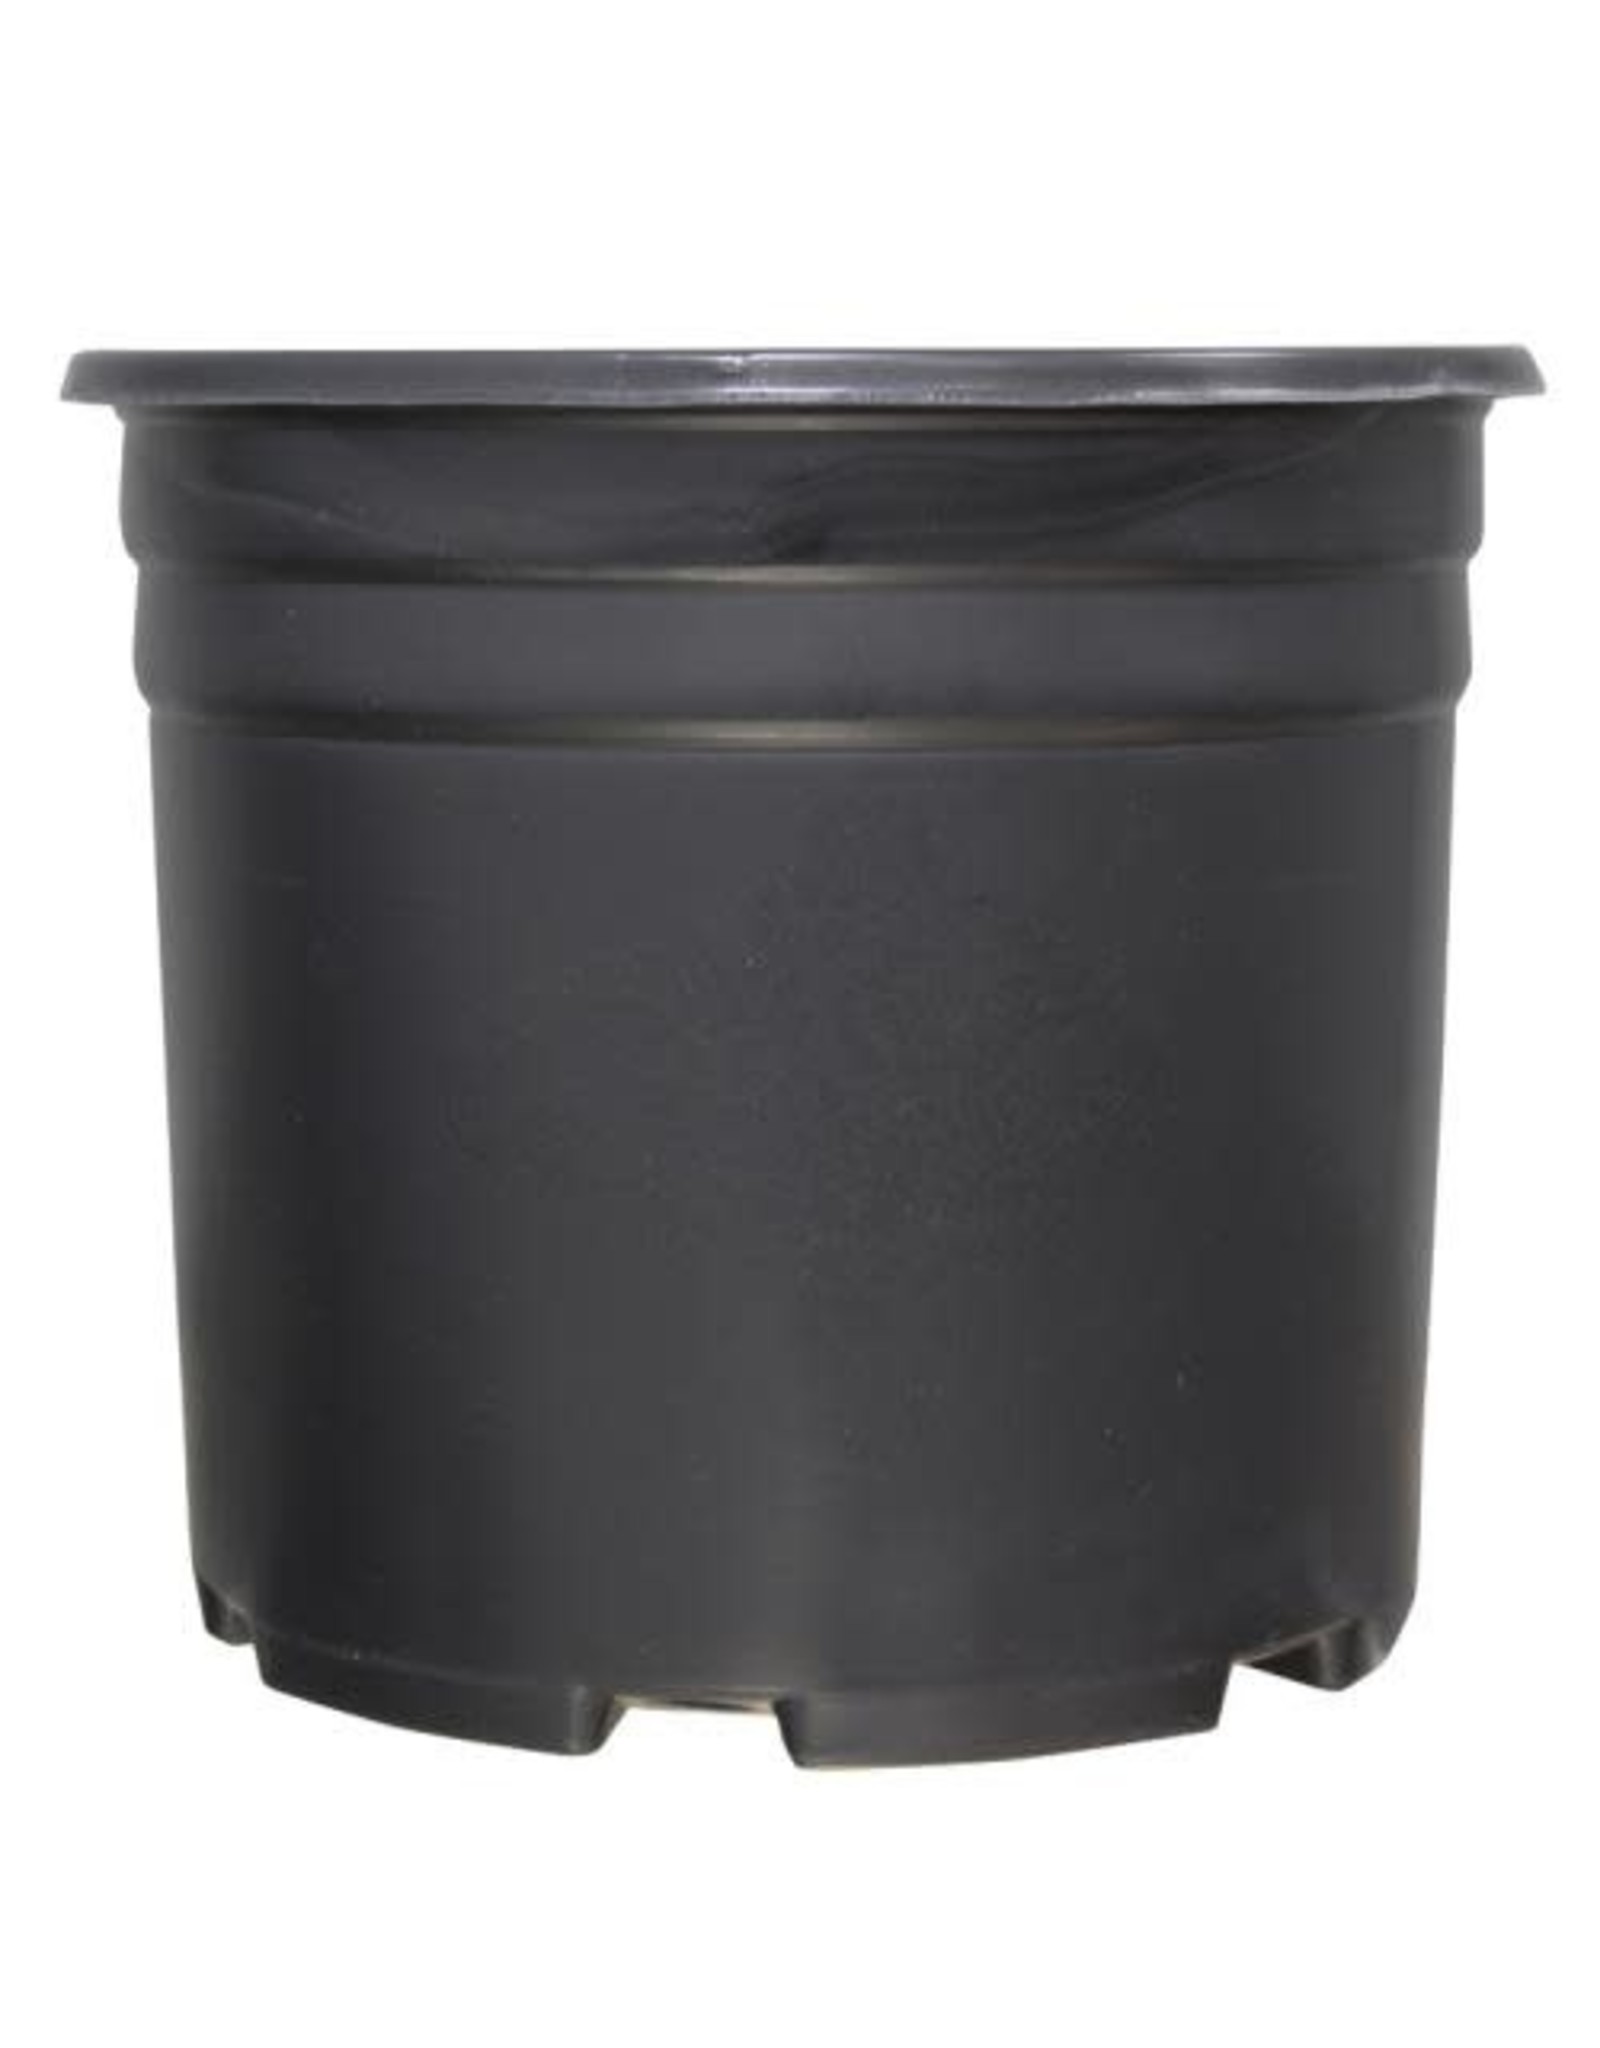 pro can Thermoformed Nursery Pot 3 Gallon